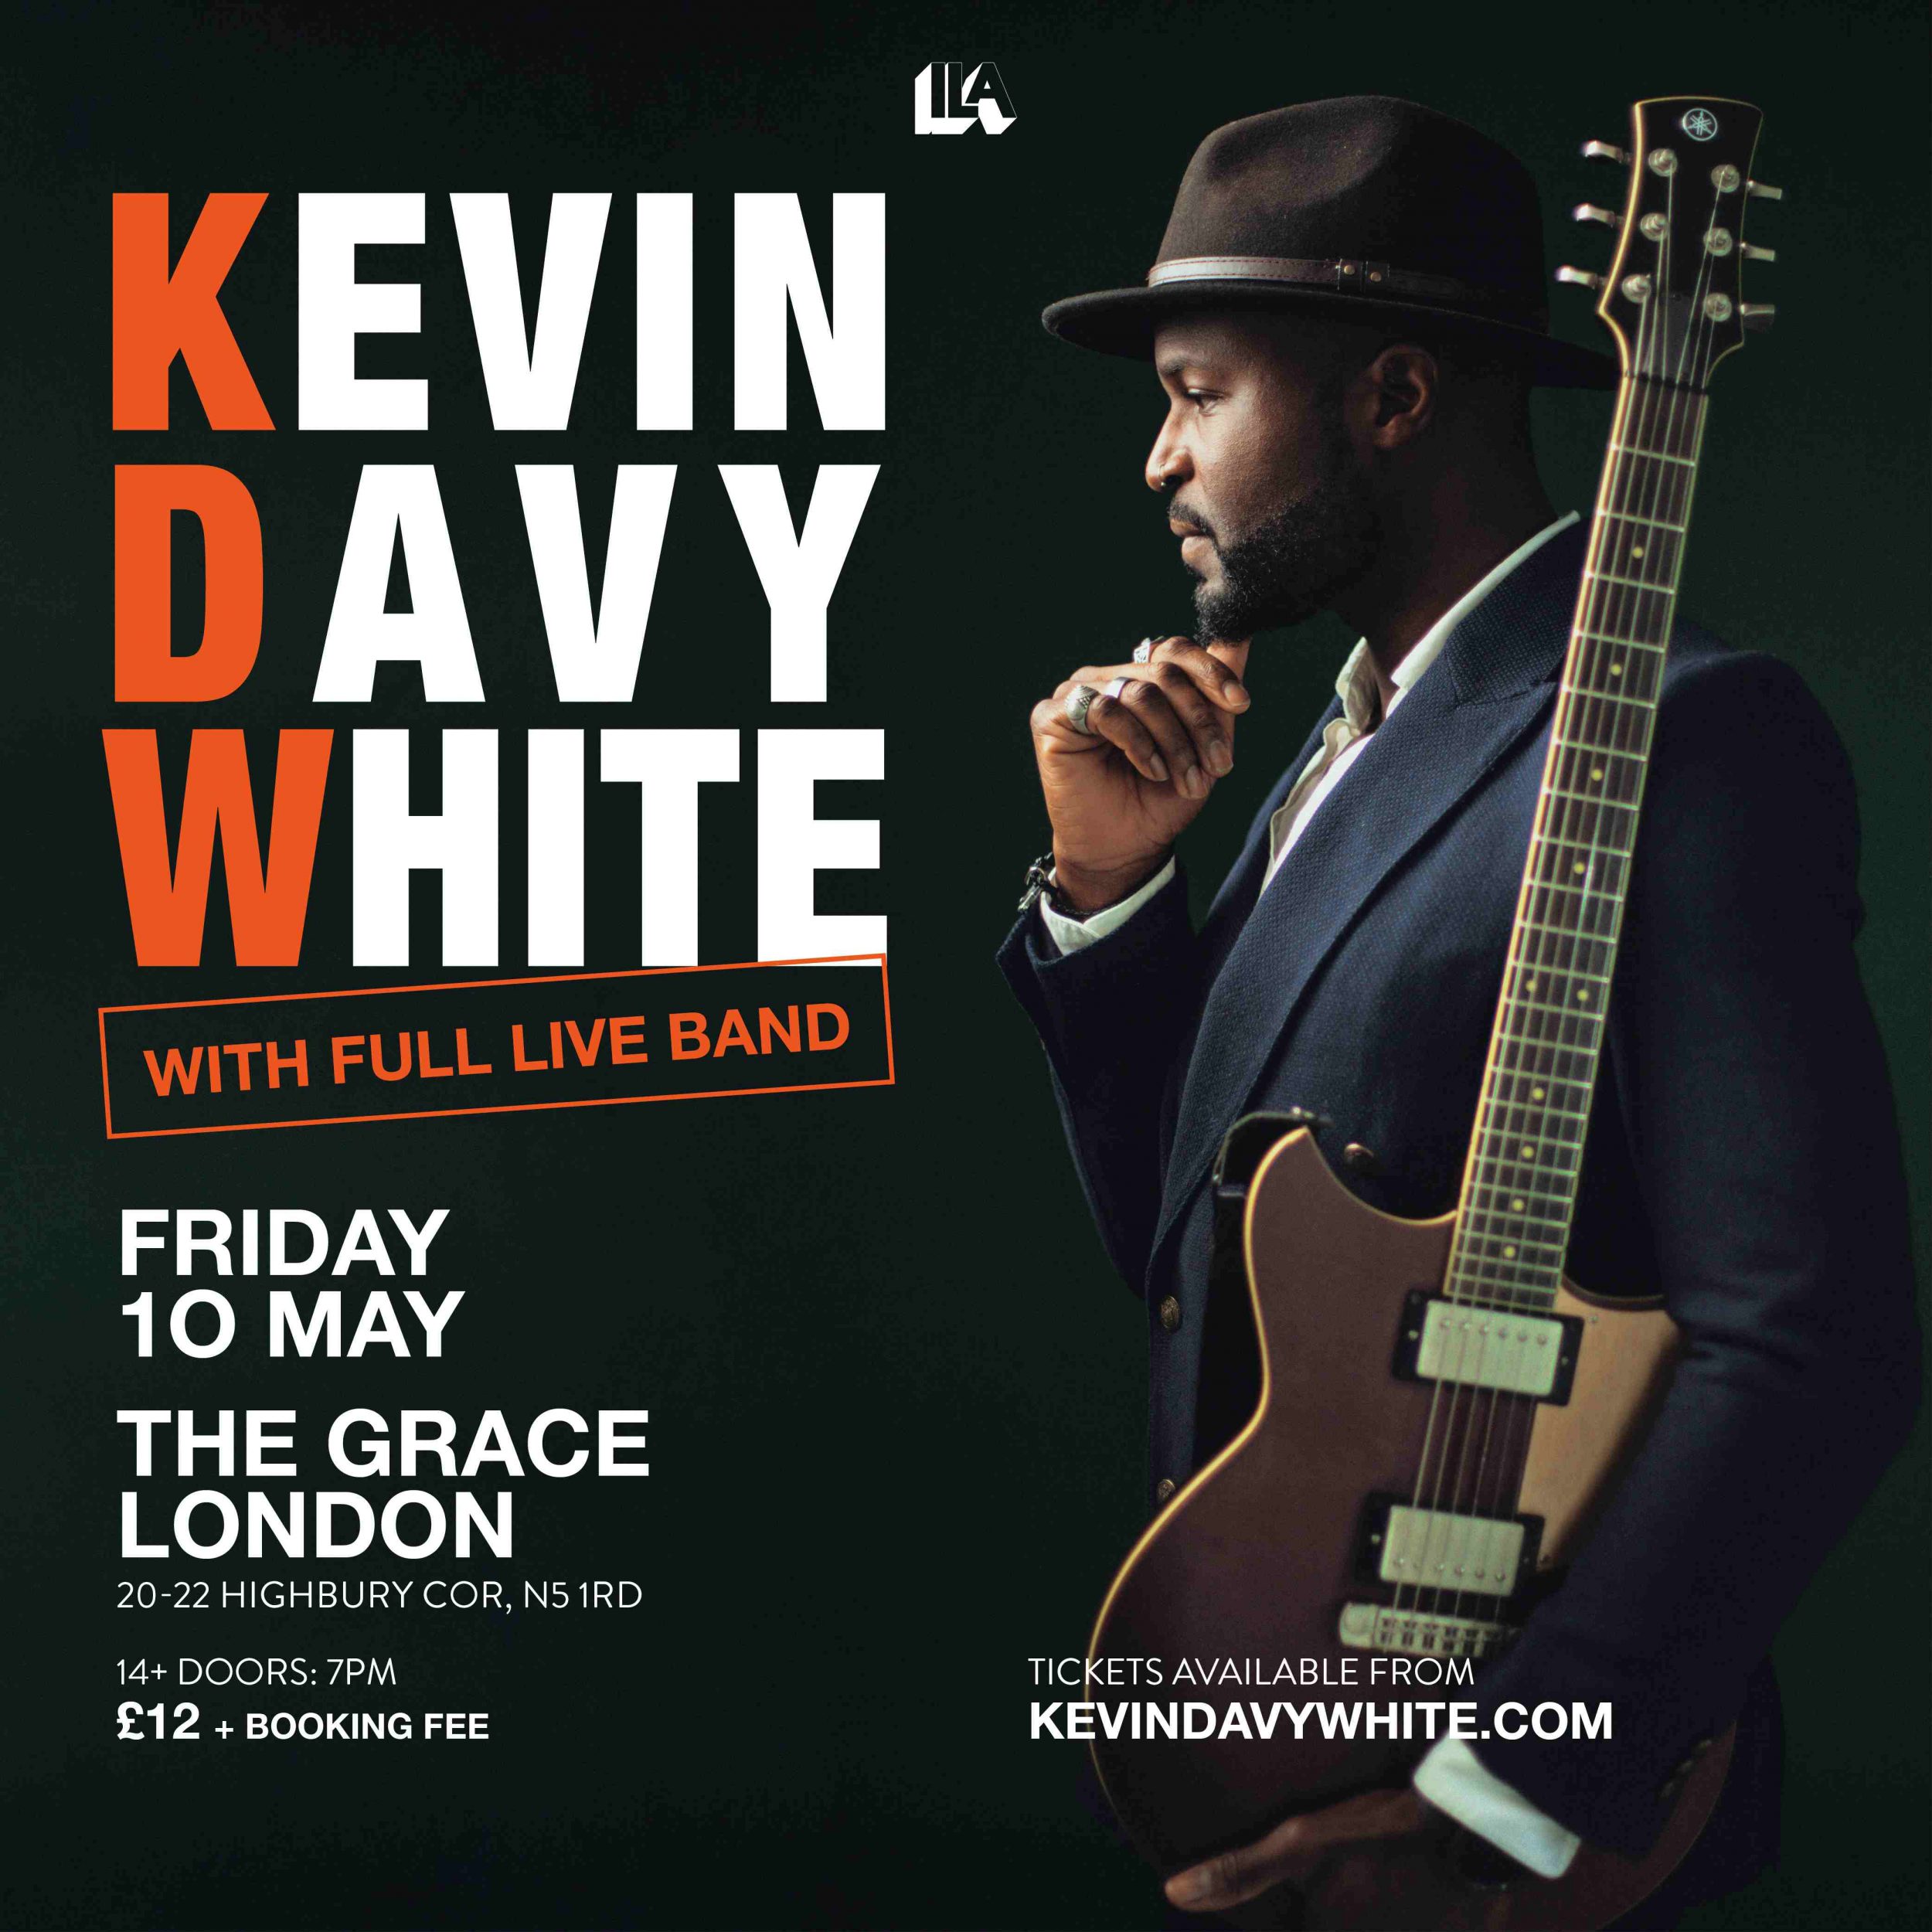 KEVIN DAVY WHITE POSTER